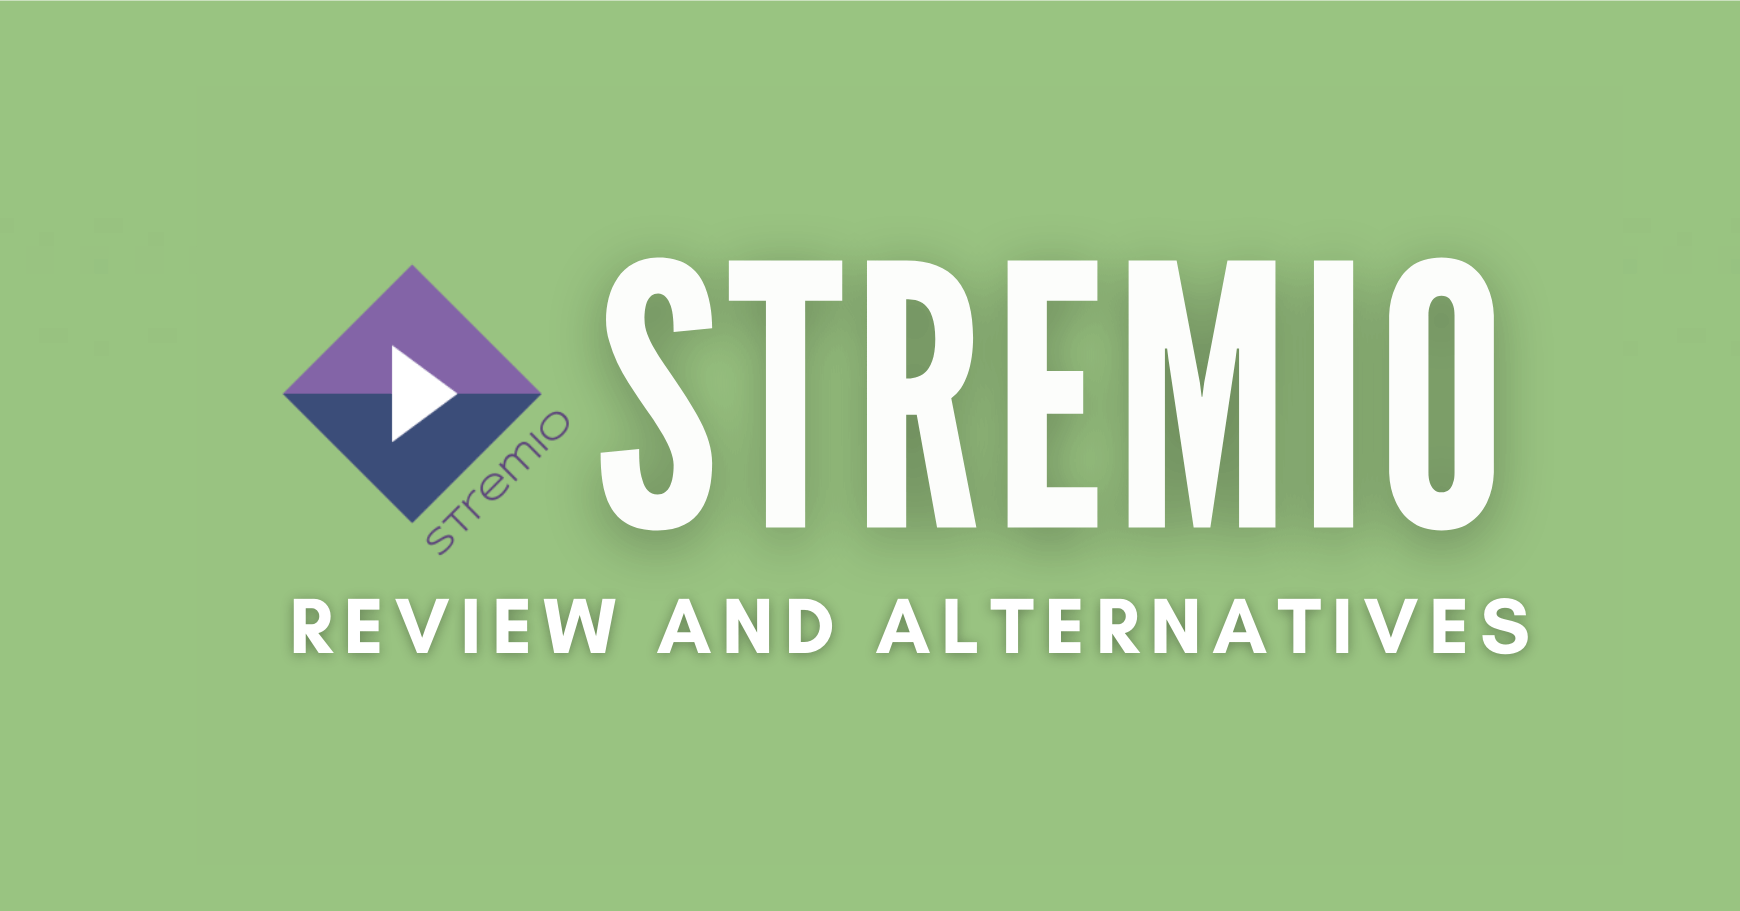 Stremio Review and Alternatives